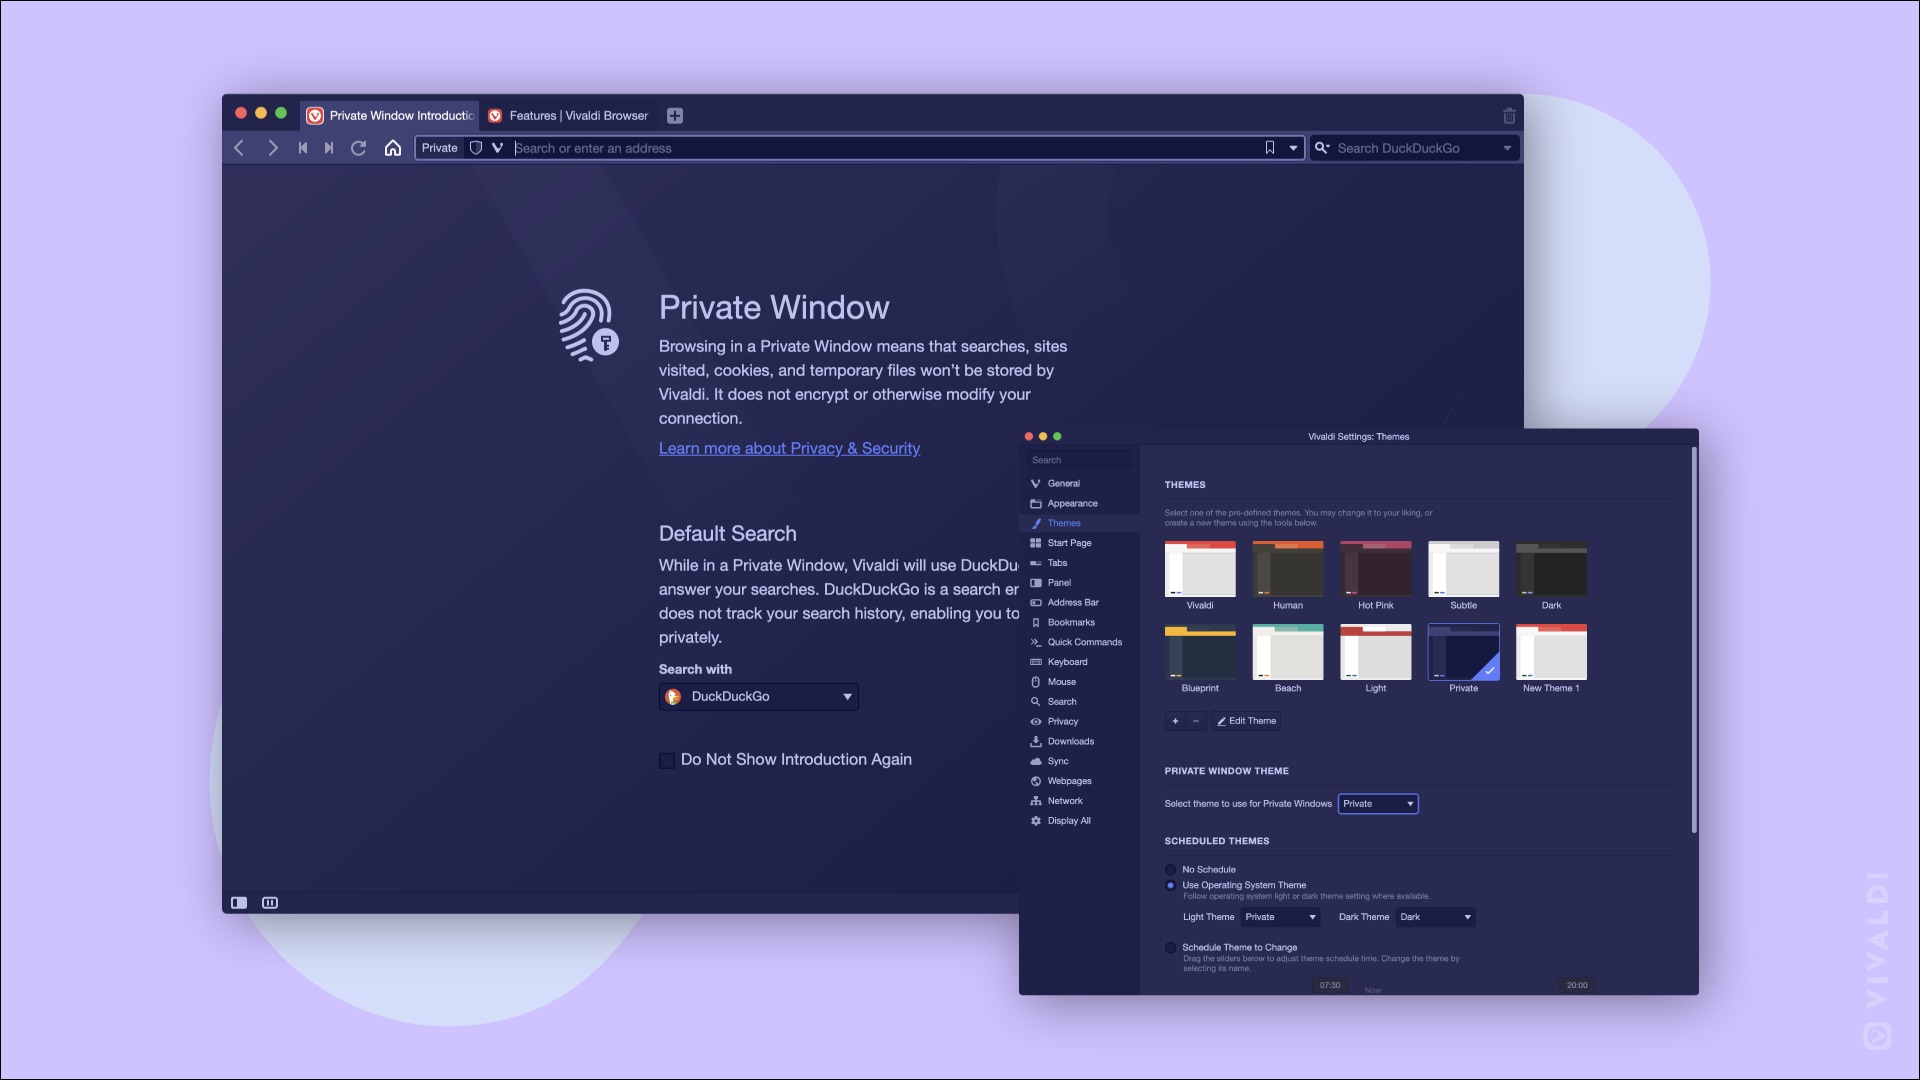 Vivaldi 3.3 Lets You Pause the Internet, Adds New Private Window Themes